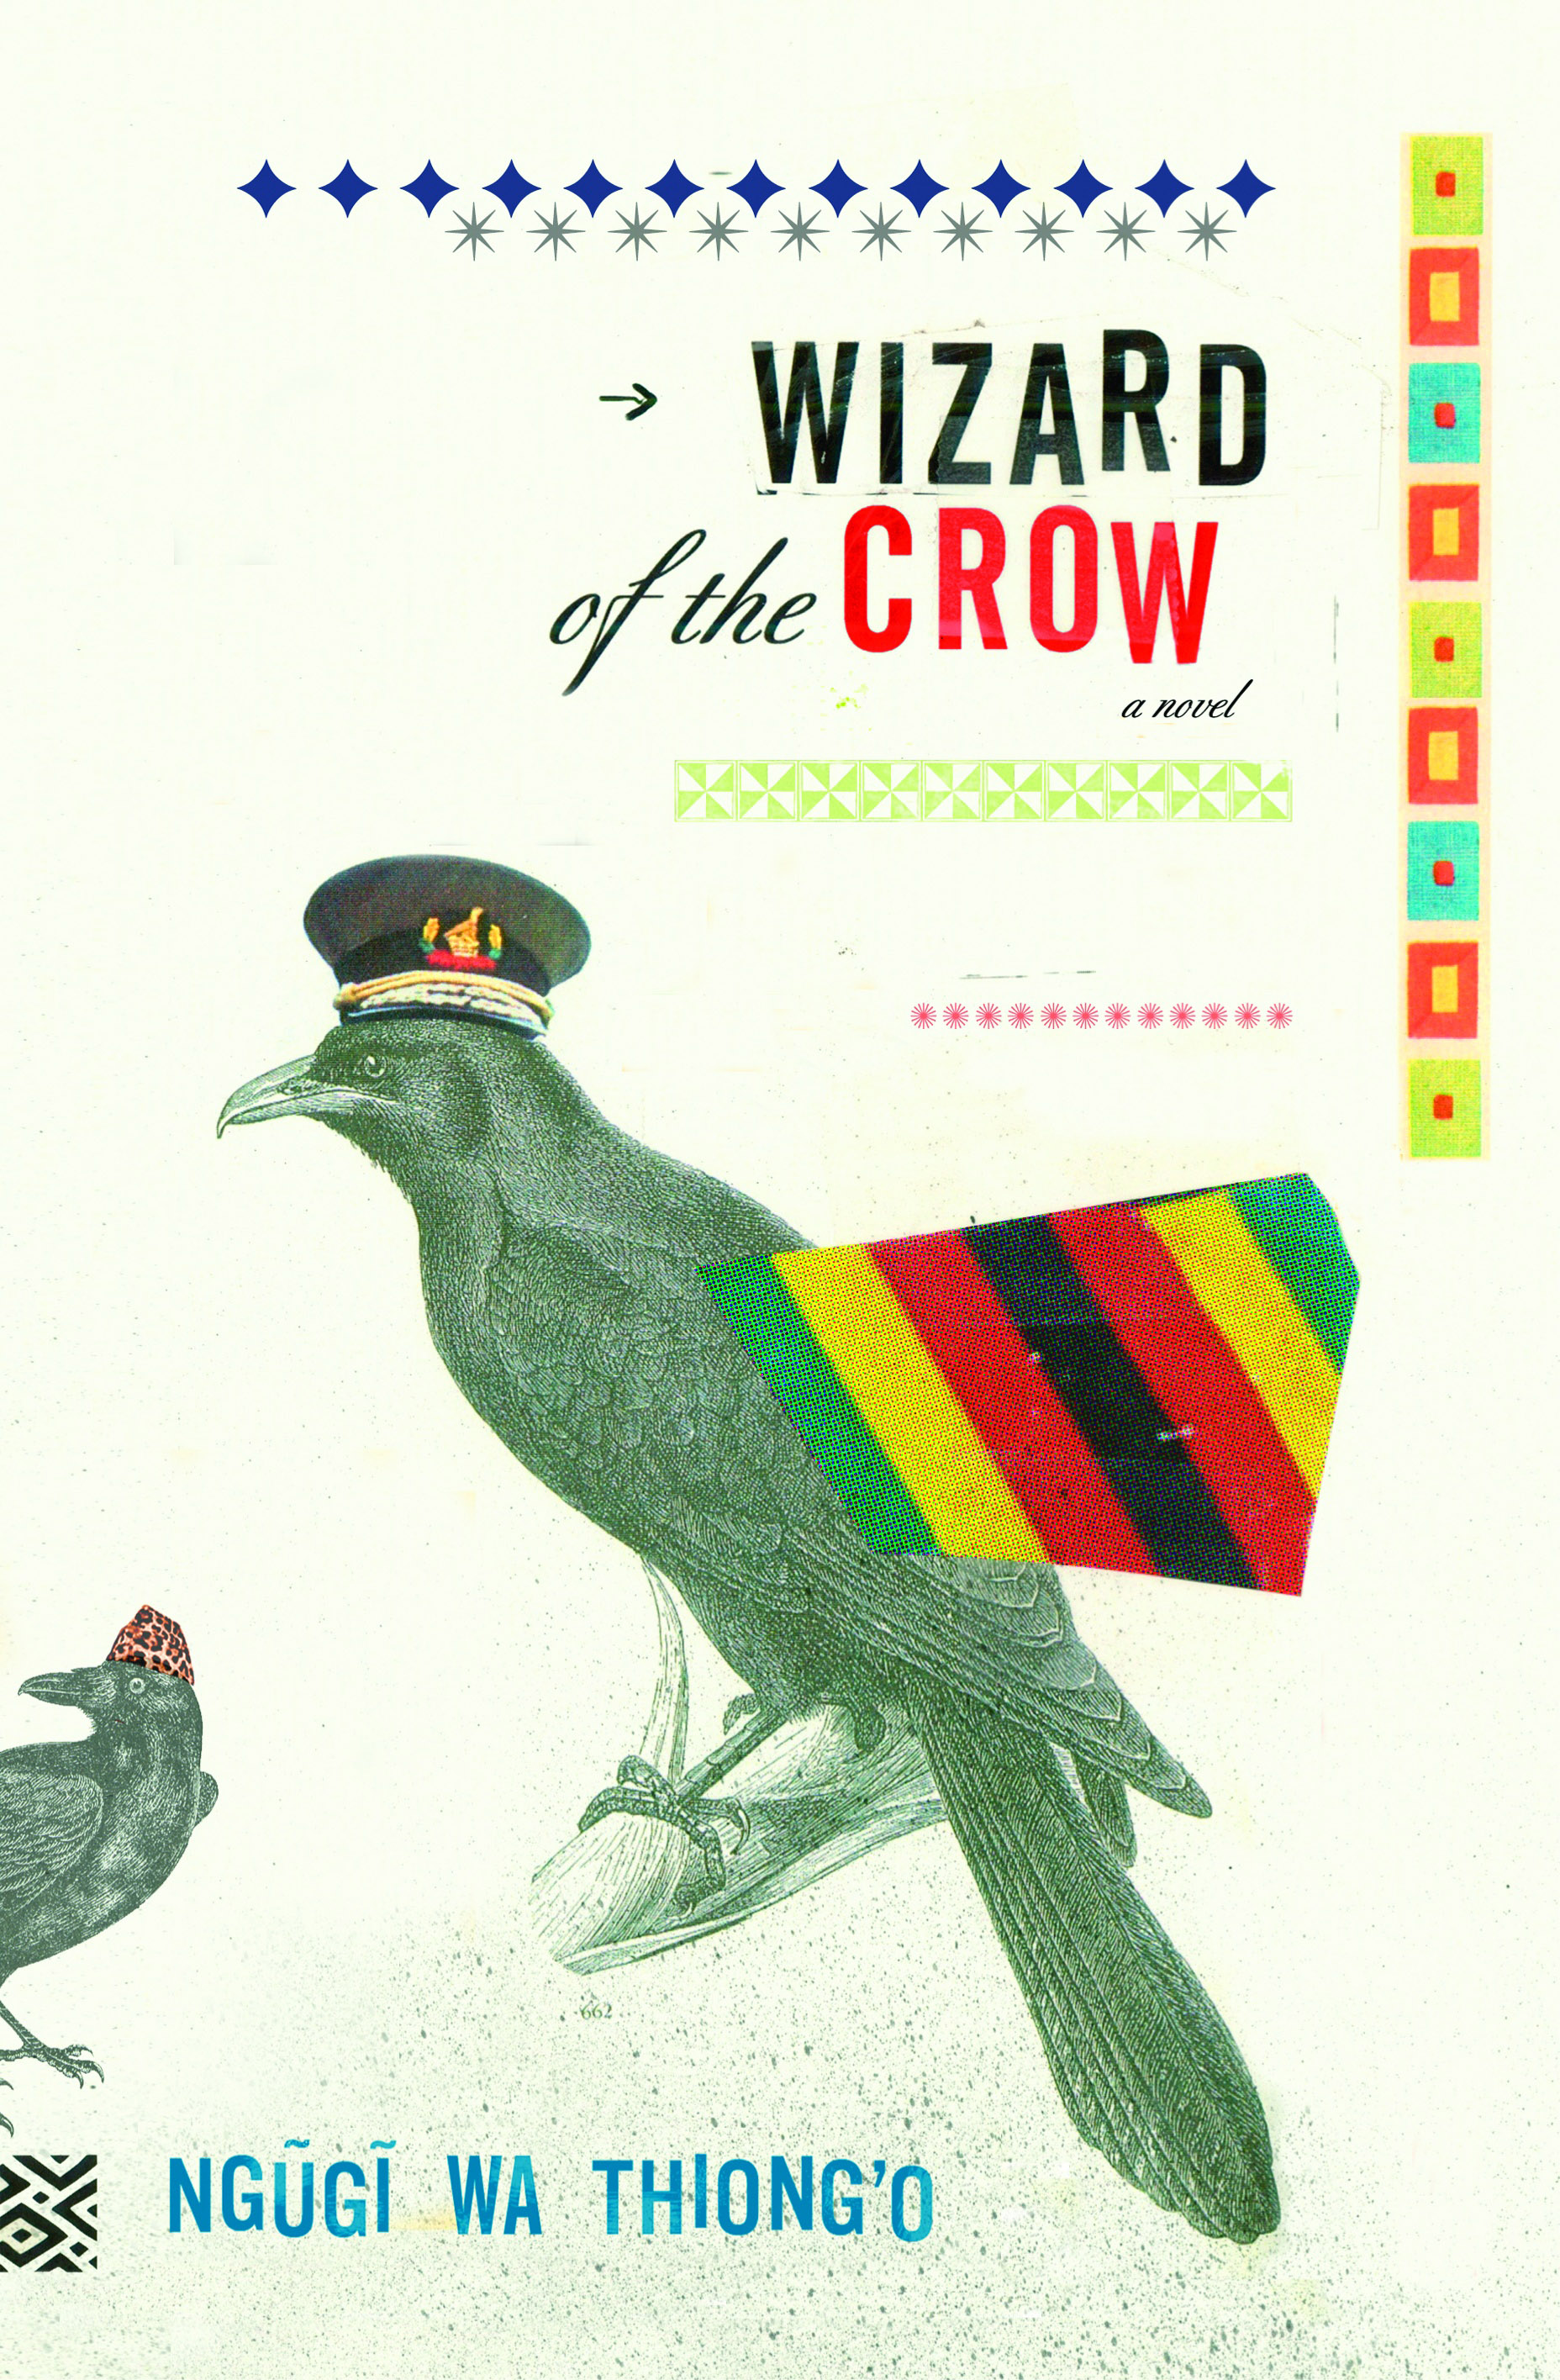 Wizard of the Crow: Ngugi will read from his 2006 novel, Wizard of the Crow, a sweeping satire laced with magical realism, described by Ngugi as a “global epic from Africa.”